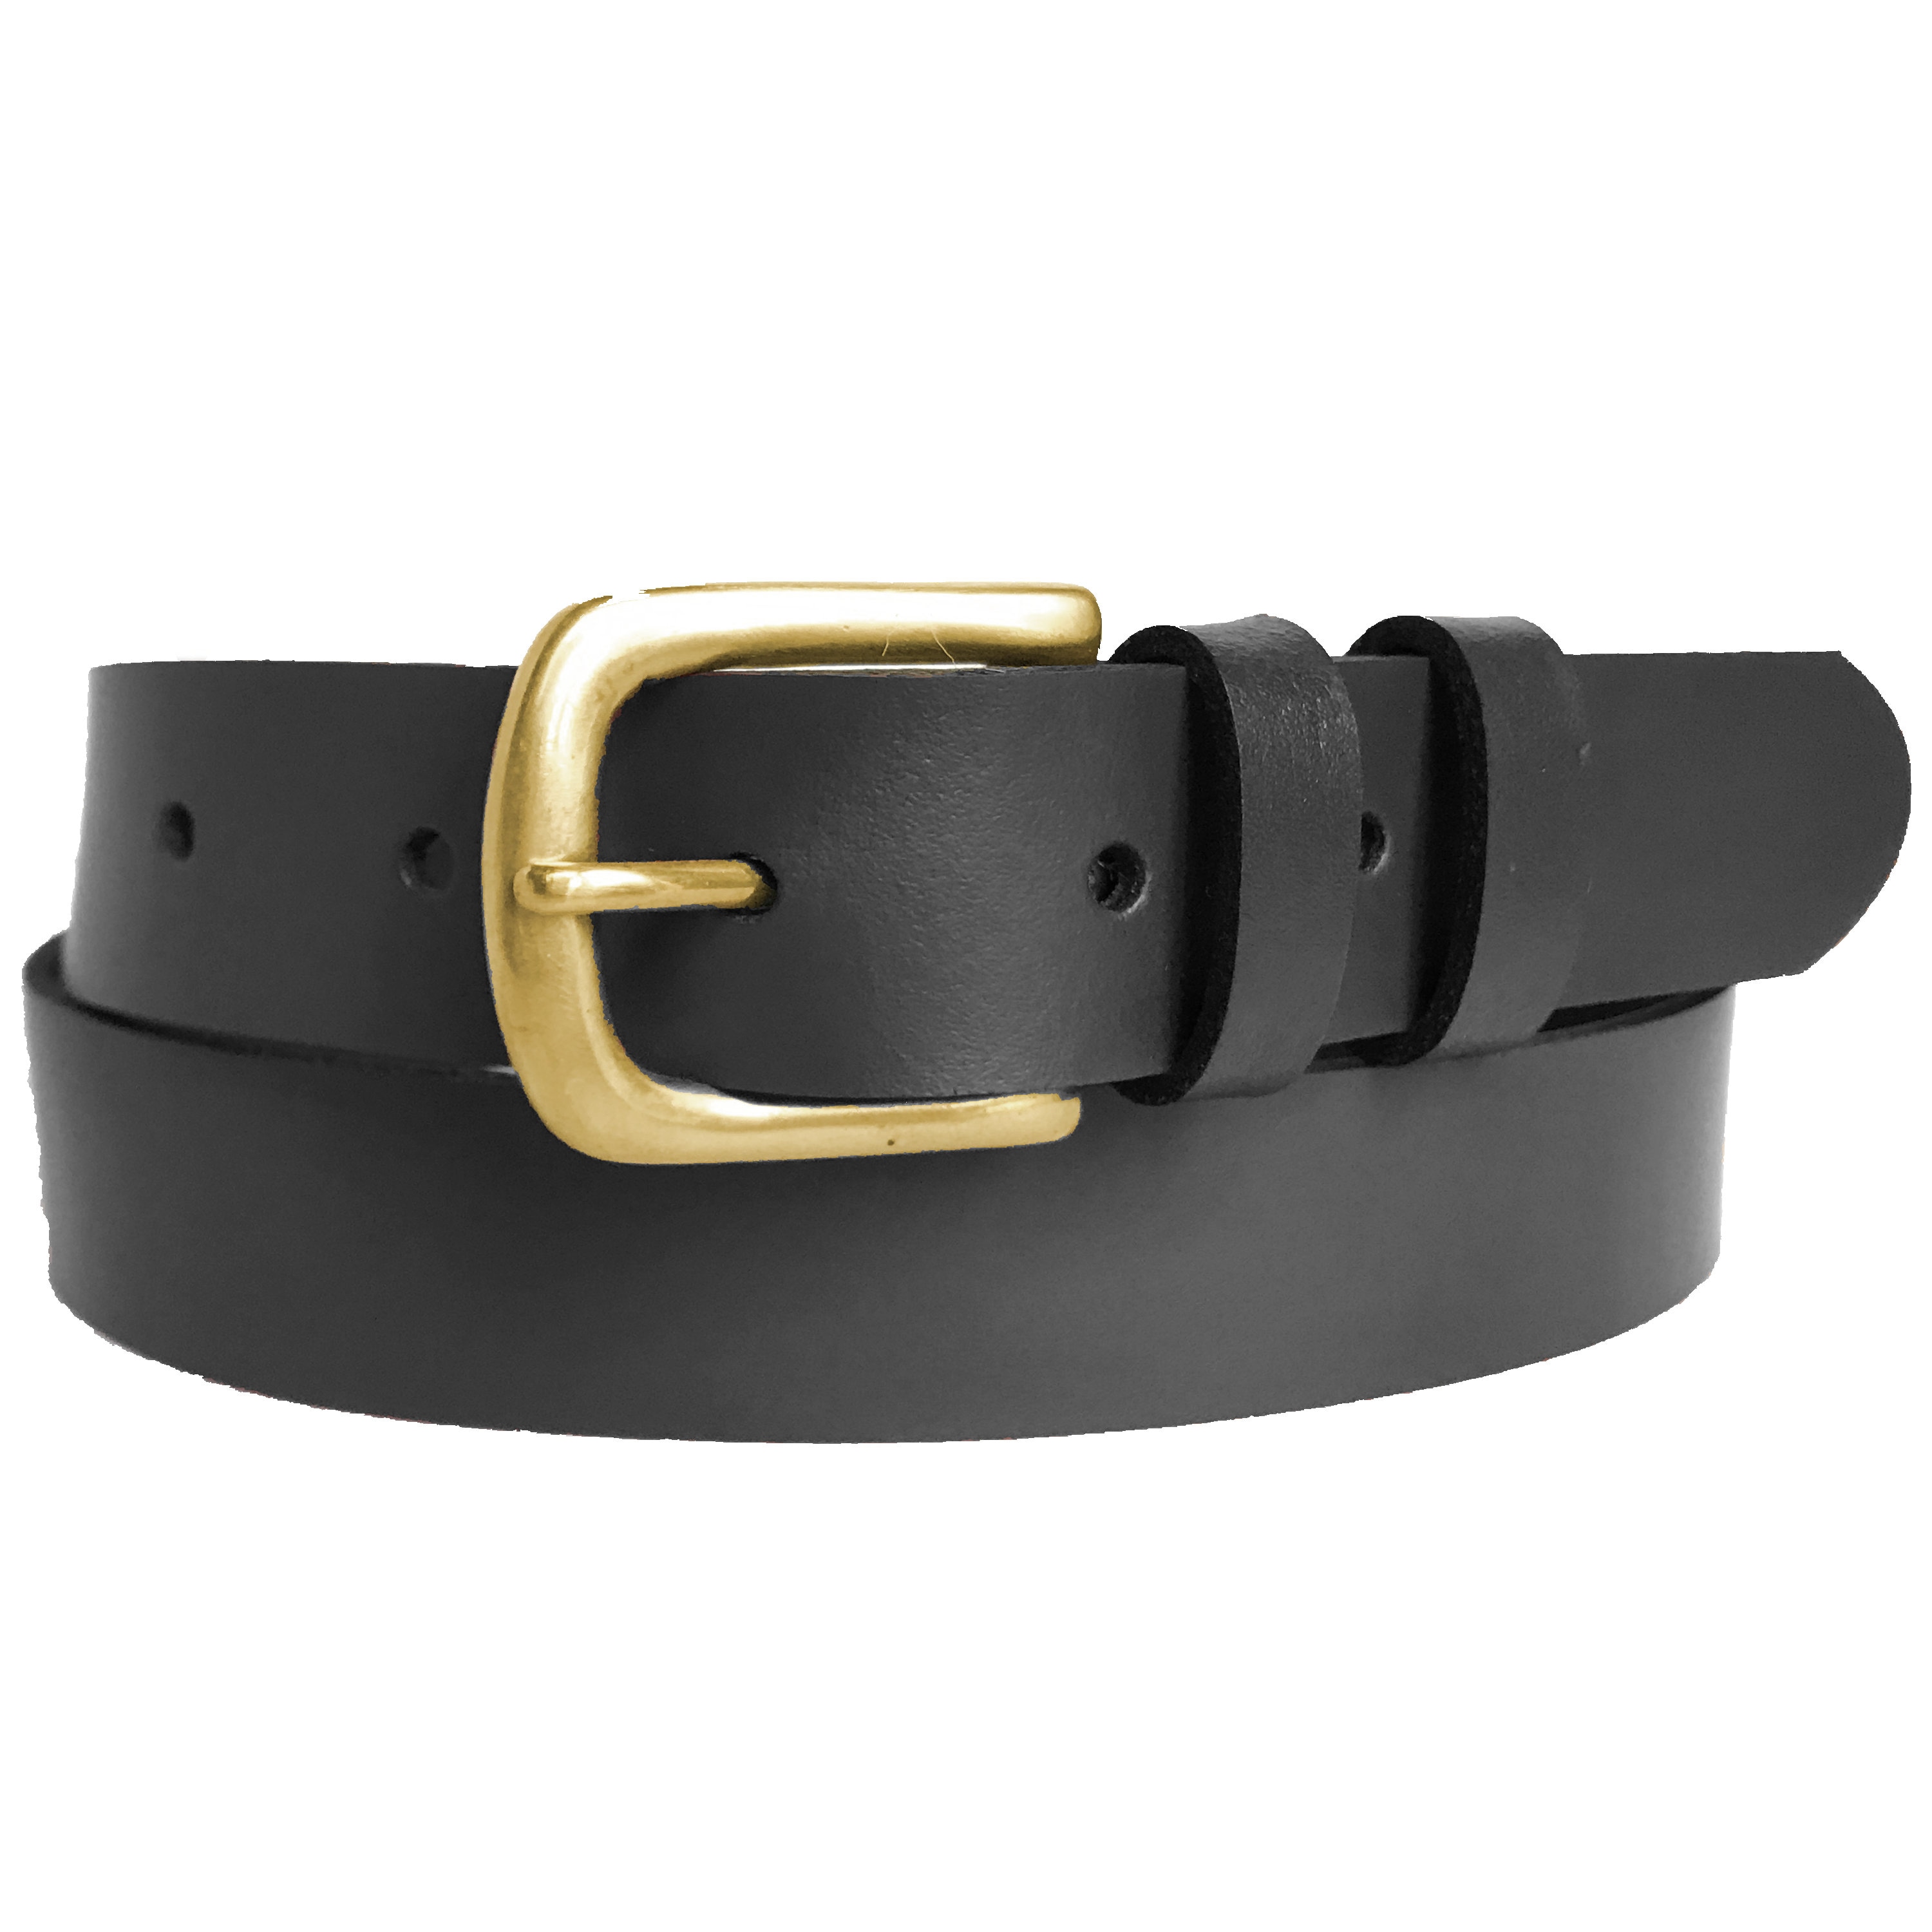 Black Leather Belt for Women and